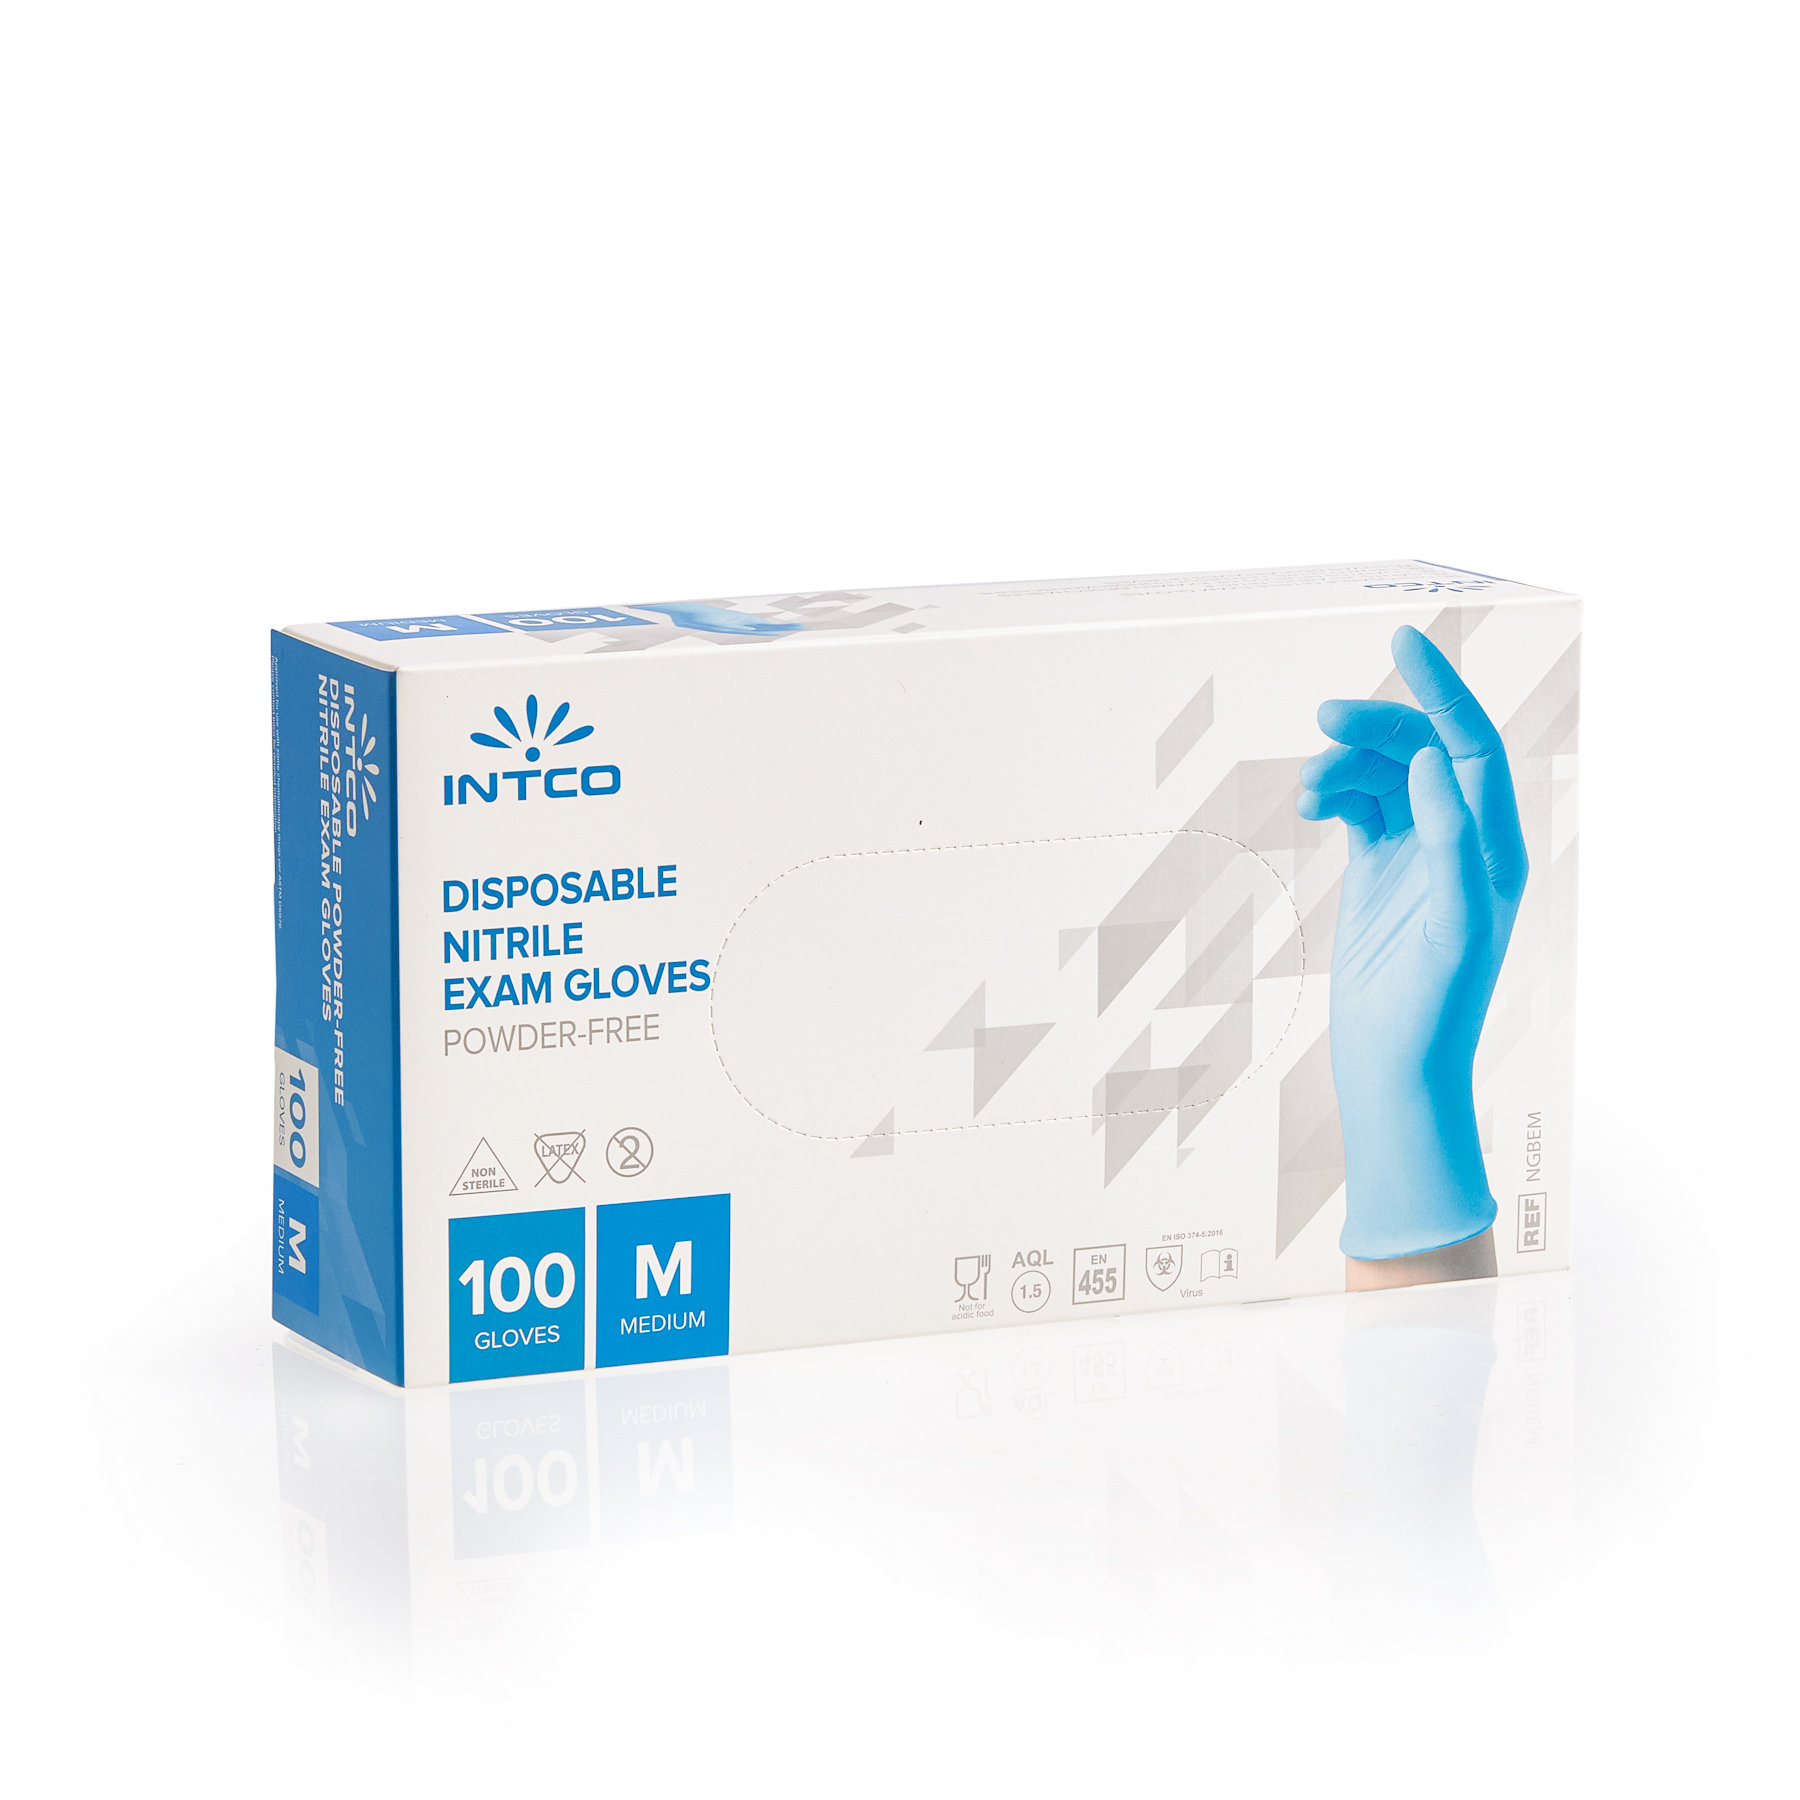 INTCO DISPOSABLE NITRLE EXAM GLOVES | Nitrilhandschuhe